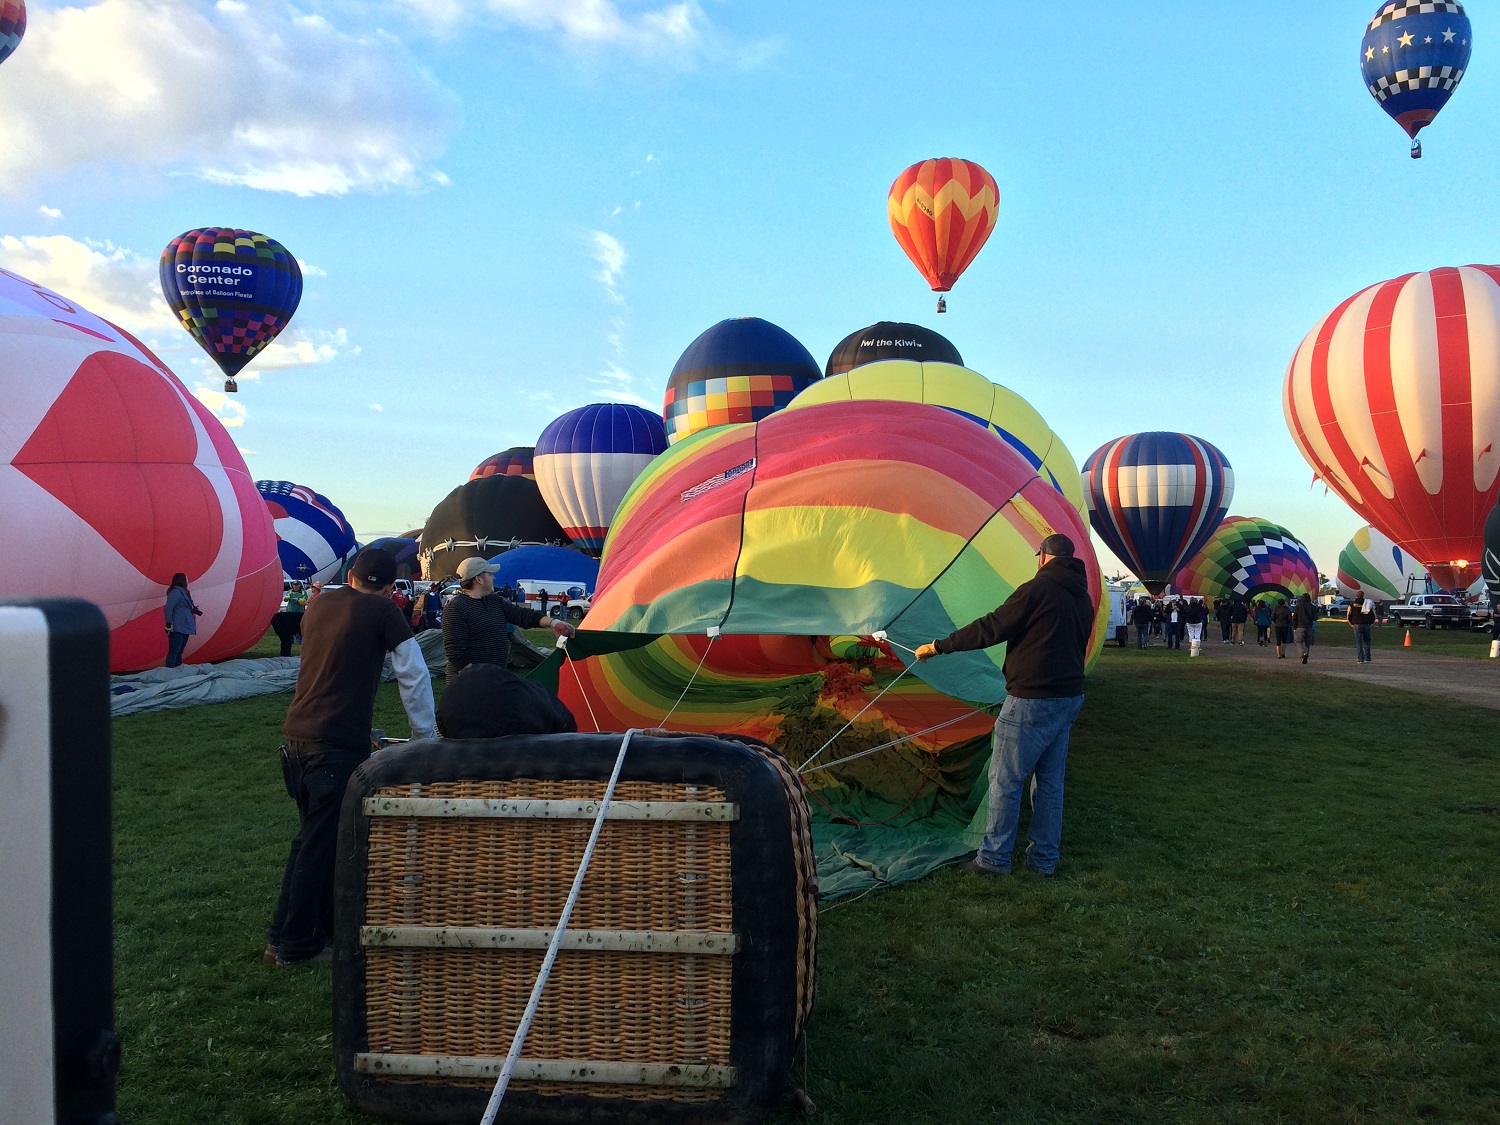 A balloon is filled in the foreground while others launch behind it. (WTOP/Noah Frank)